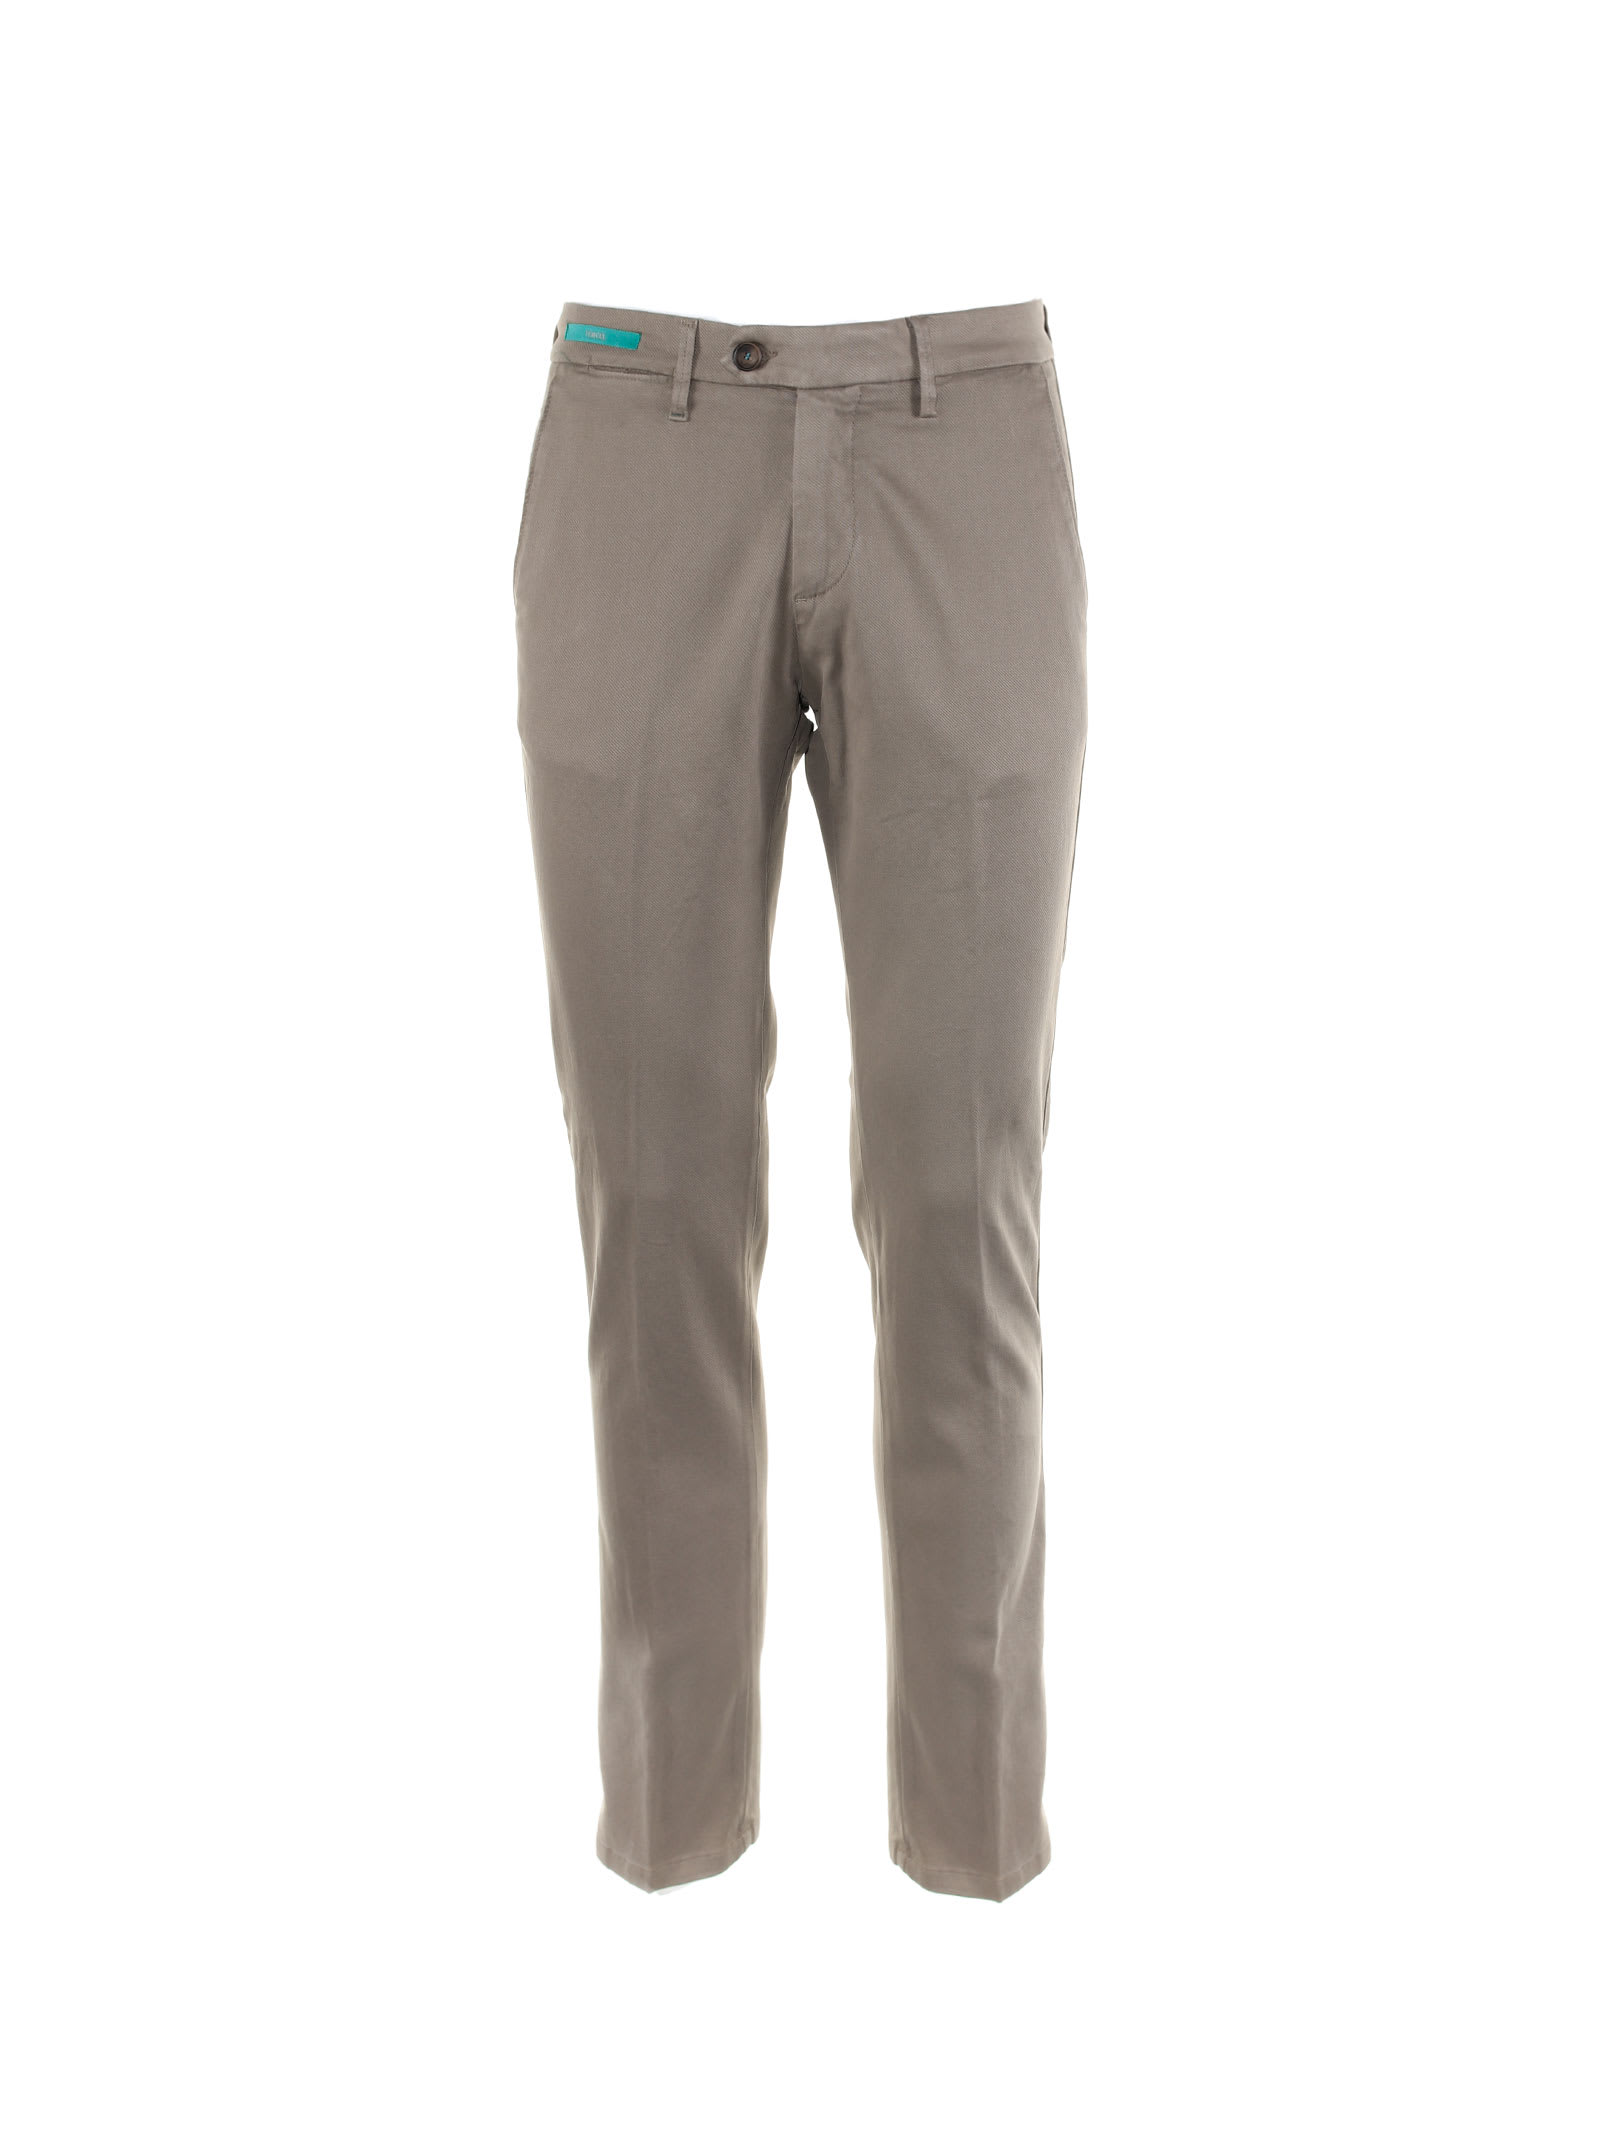 Re-HasH Chinos Trousers